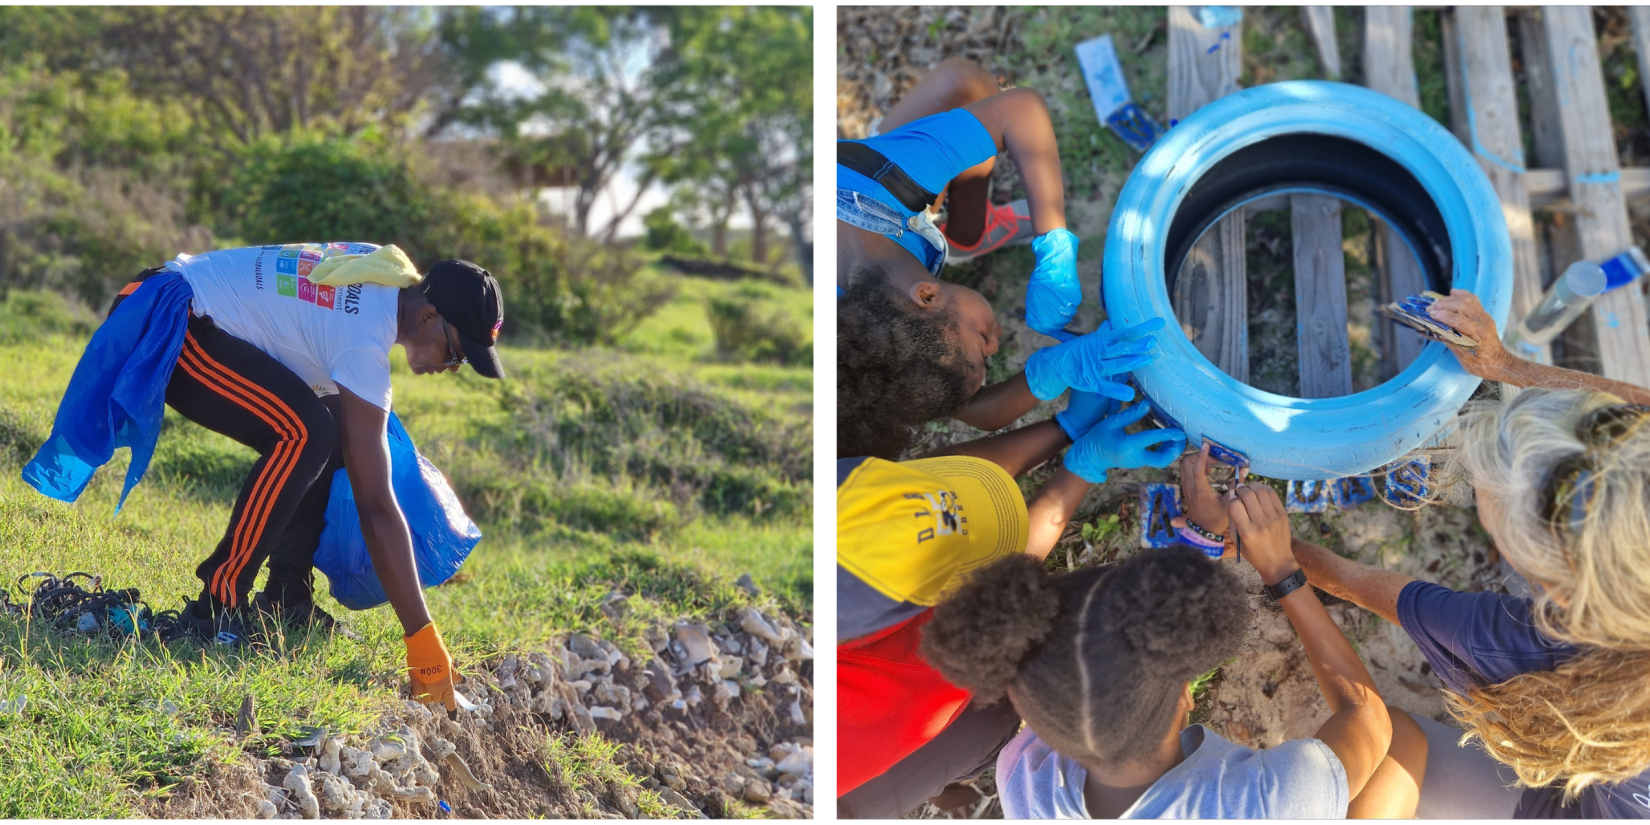 in a collage, a man in an SDG branded shirt and gloves collects garbage along a coastline, next to a photo of young children painting a tyre blue as part of the environmental beautification